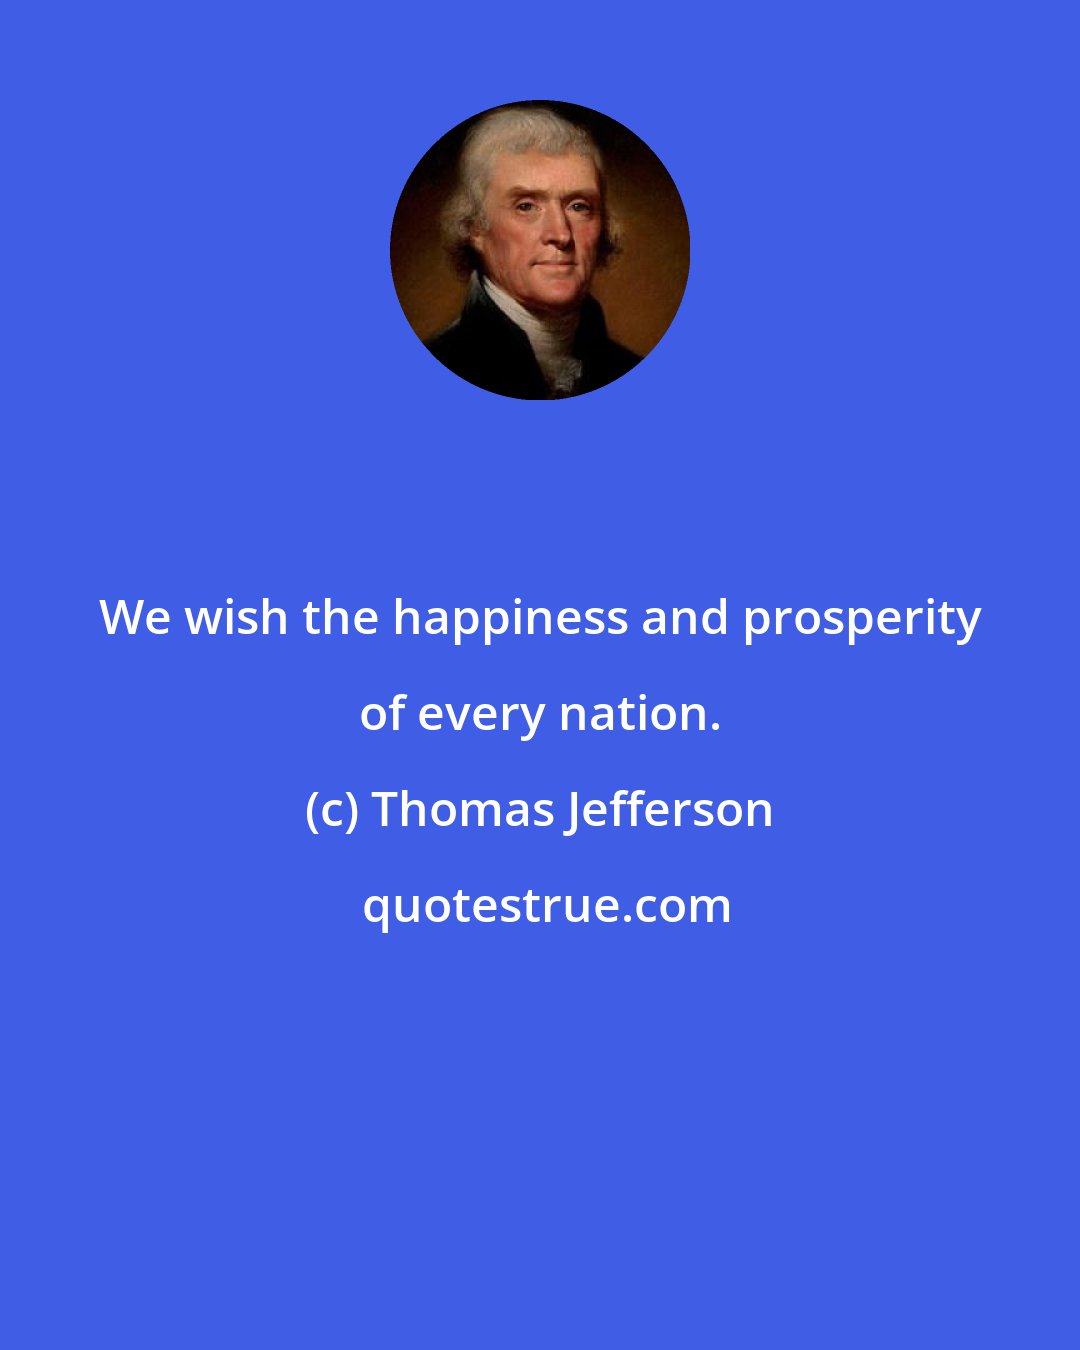 Thomas Jefferson: We wish the happiness and prosperity of every nation.